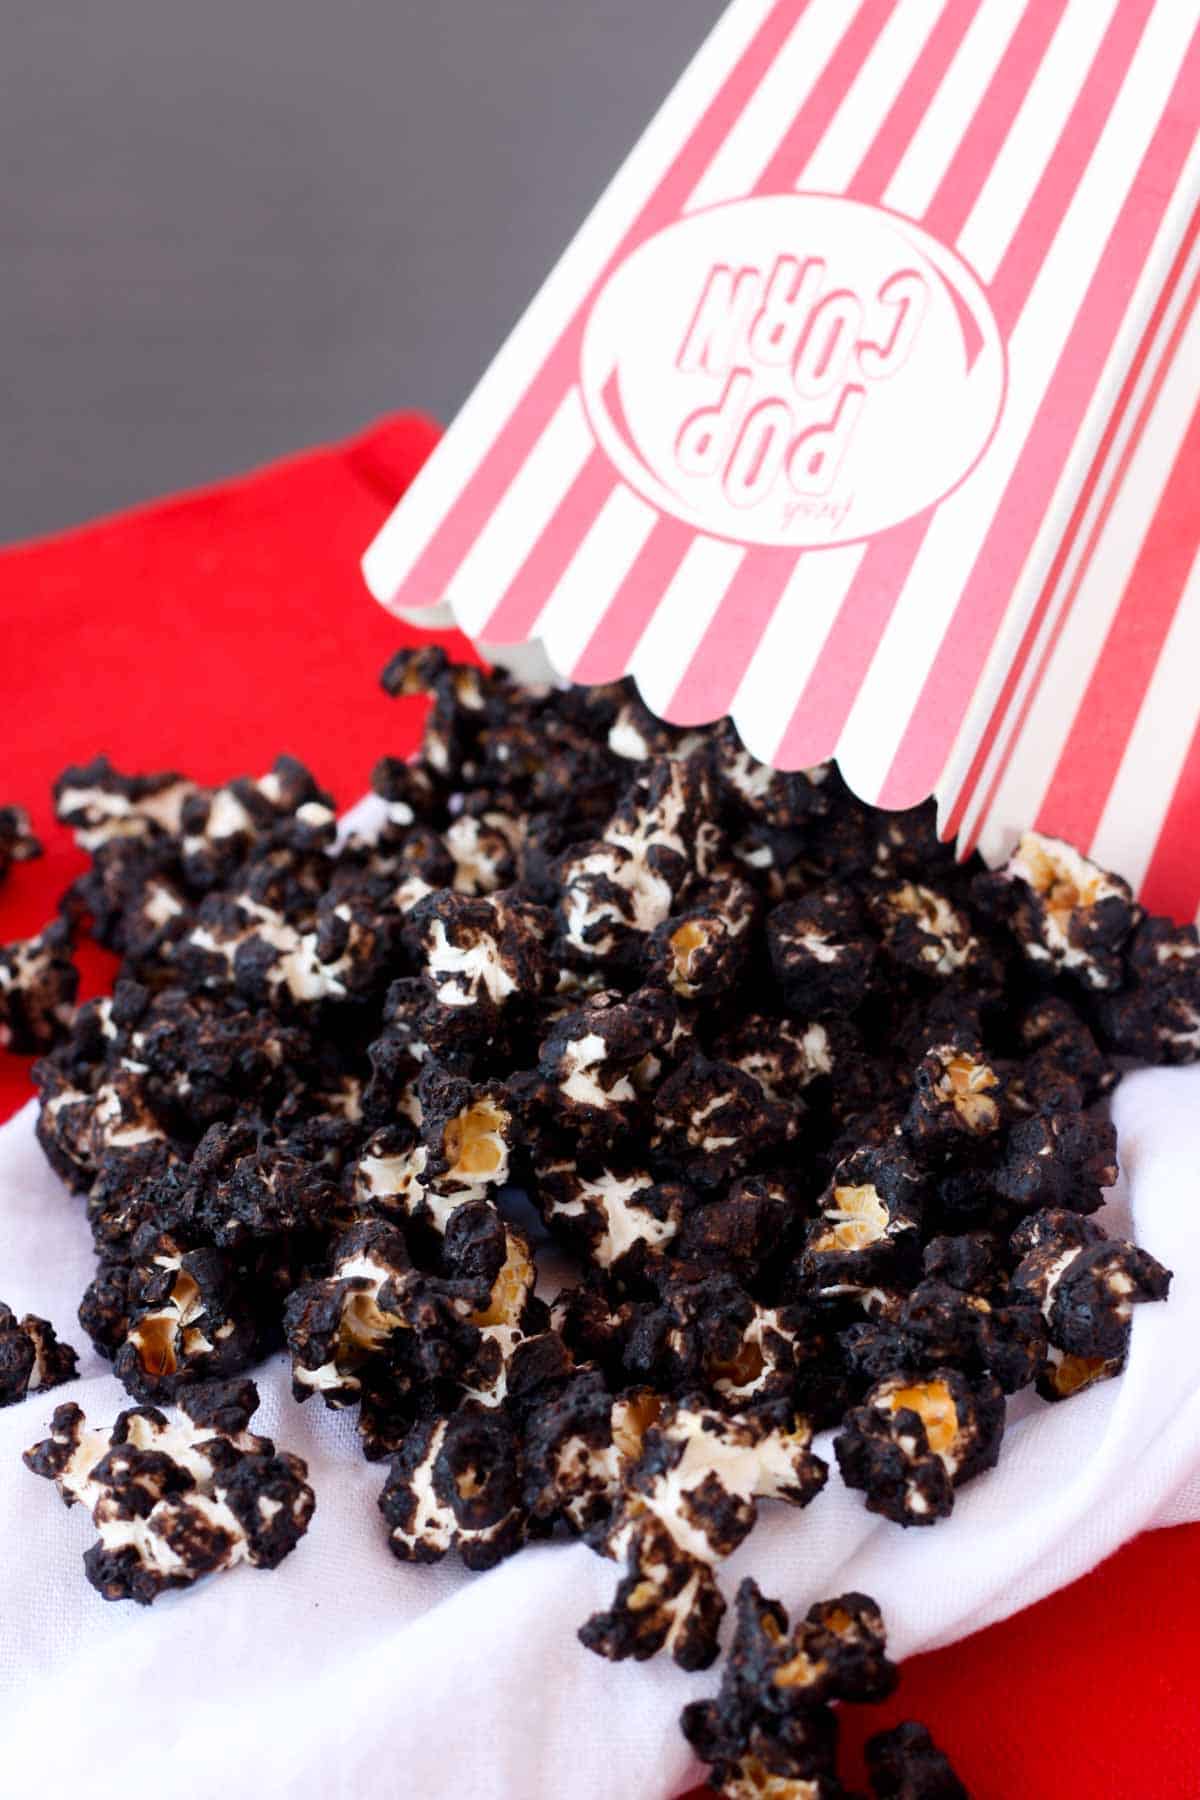 A striped popcorn box tipping upside down to spill out the Mexican hot chocolate popcorn inside.